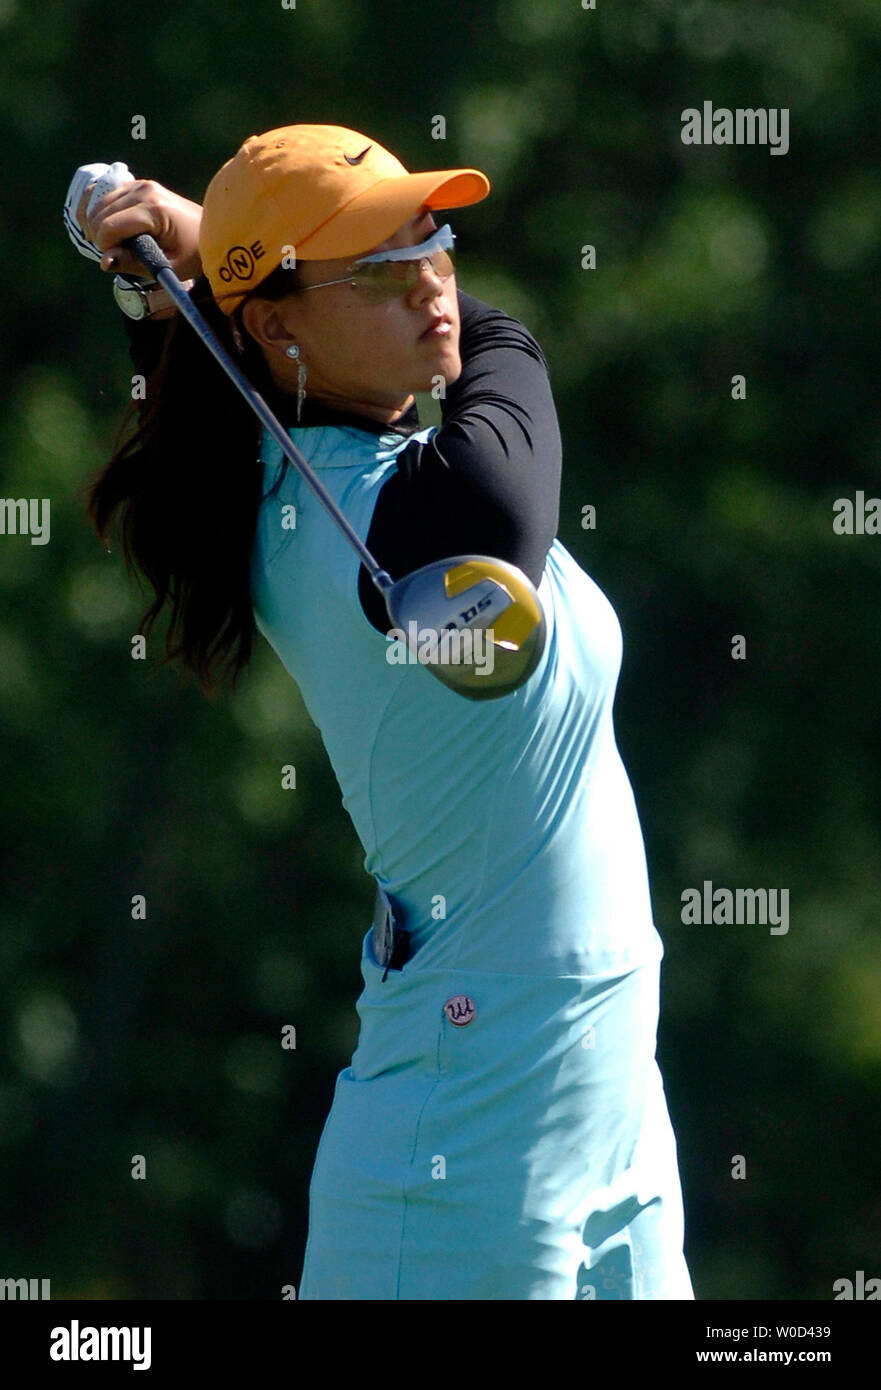 Michelle Wie of Honolulu, Hawaii watches her drive off of the eighth tee box, during the final round of the  McDonald's LPGA Championship, in Havre de Grace, Maryland on June 8, 2006. (UPI Photo/Kevin Dietsch) Stock Photo